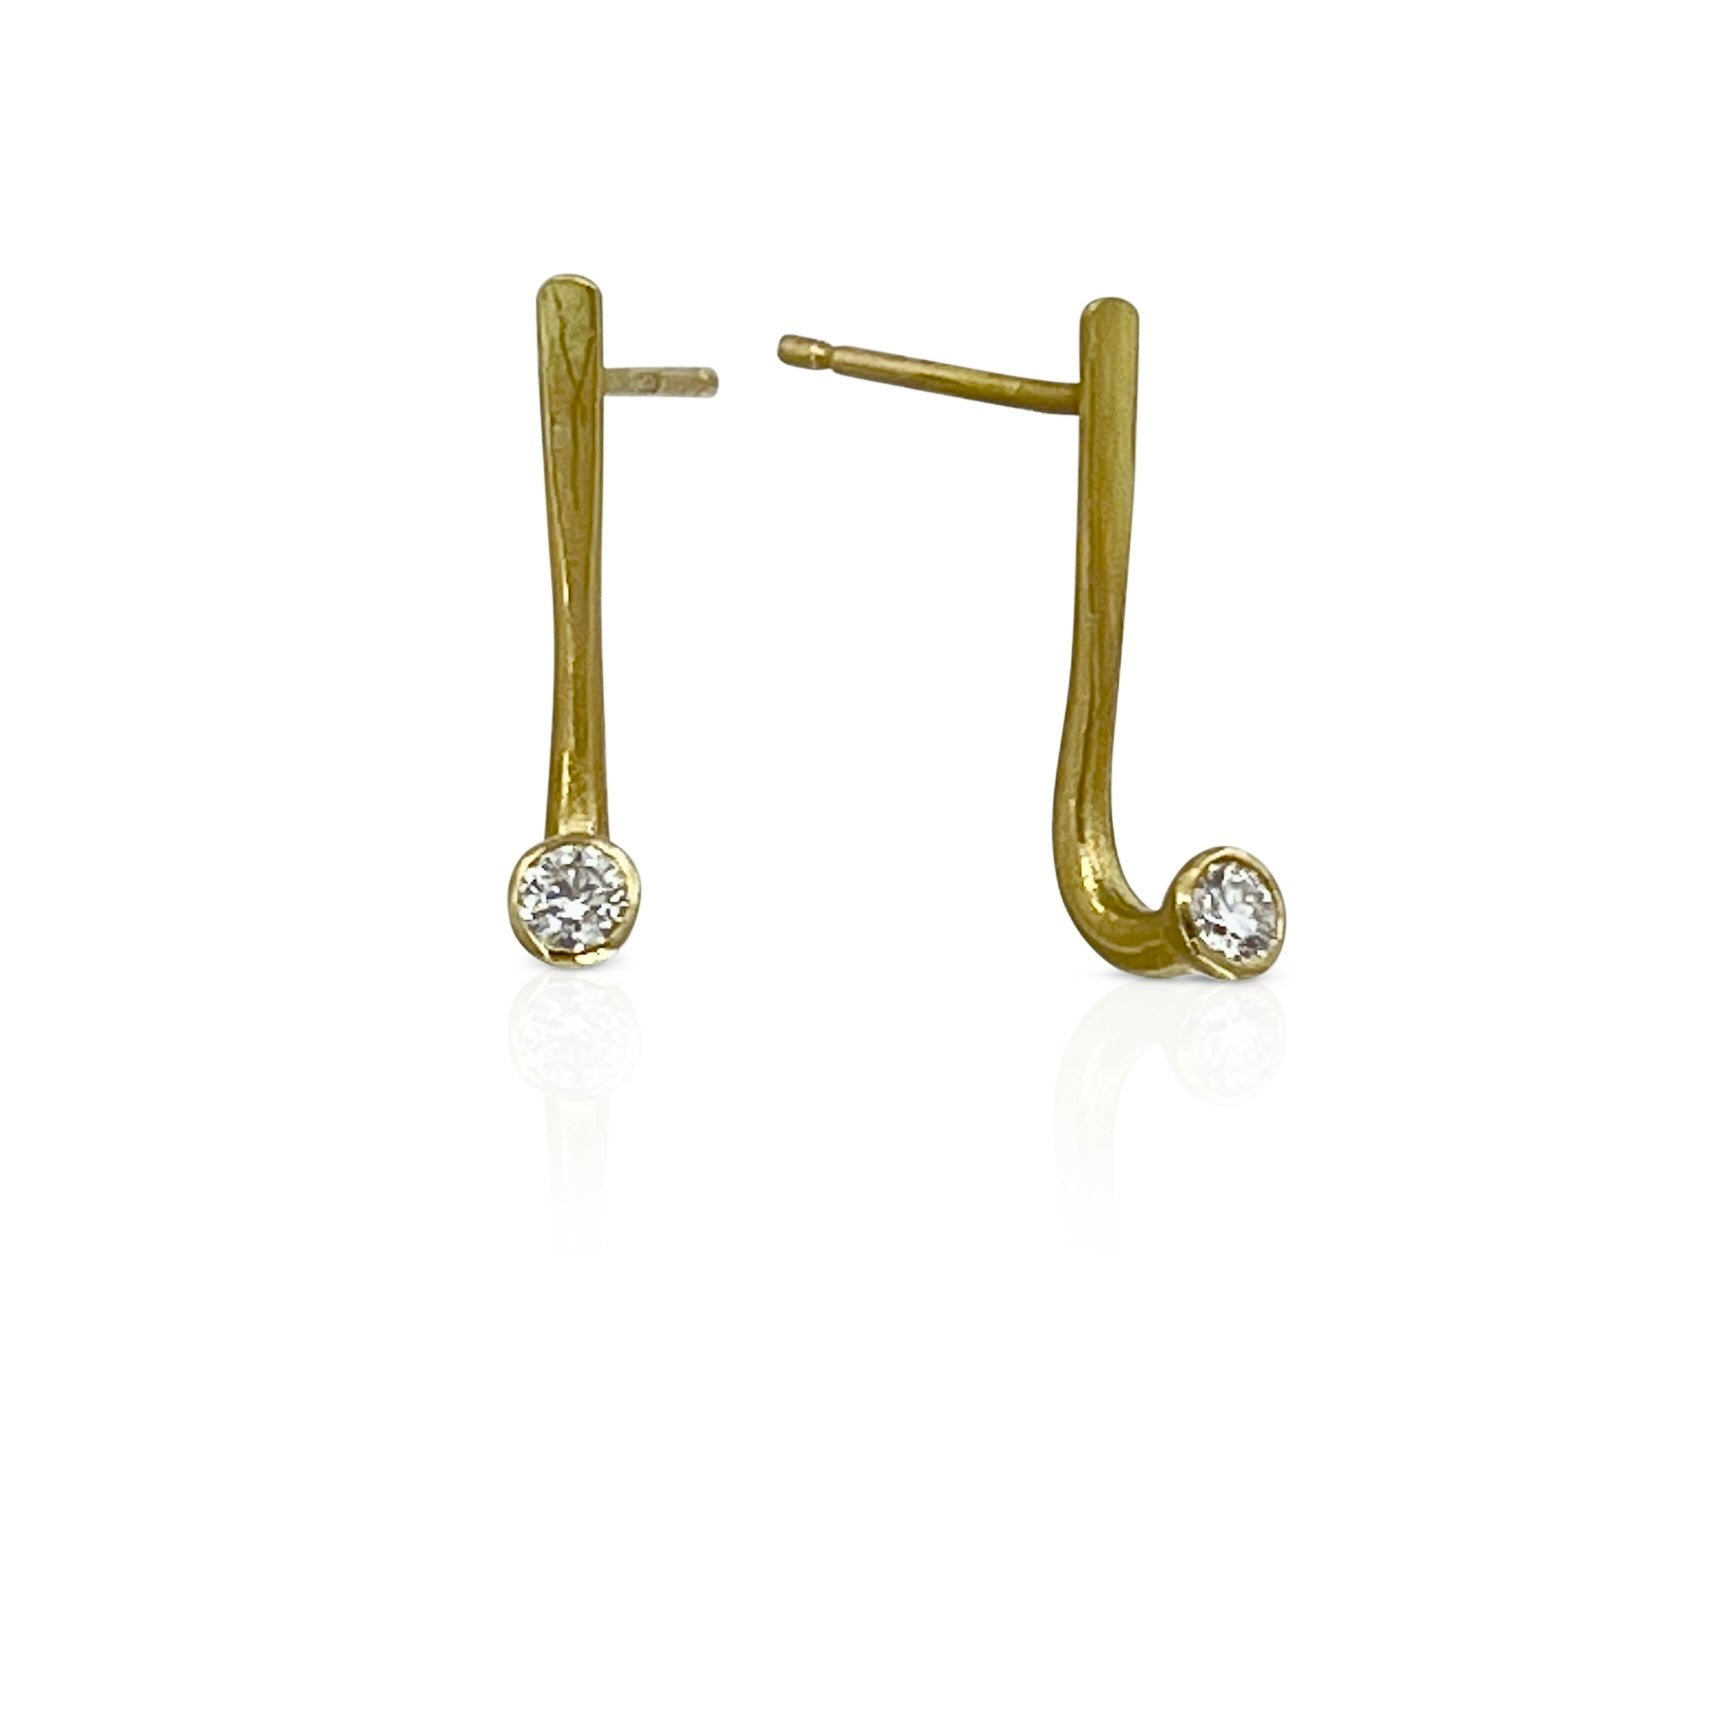 Earrings in 18K gold with stacked diamond drops with natural and lab grown diamonds shown on model made by Ayesha Mayadas